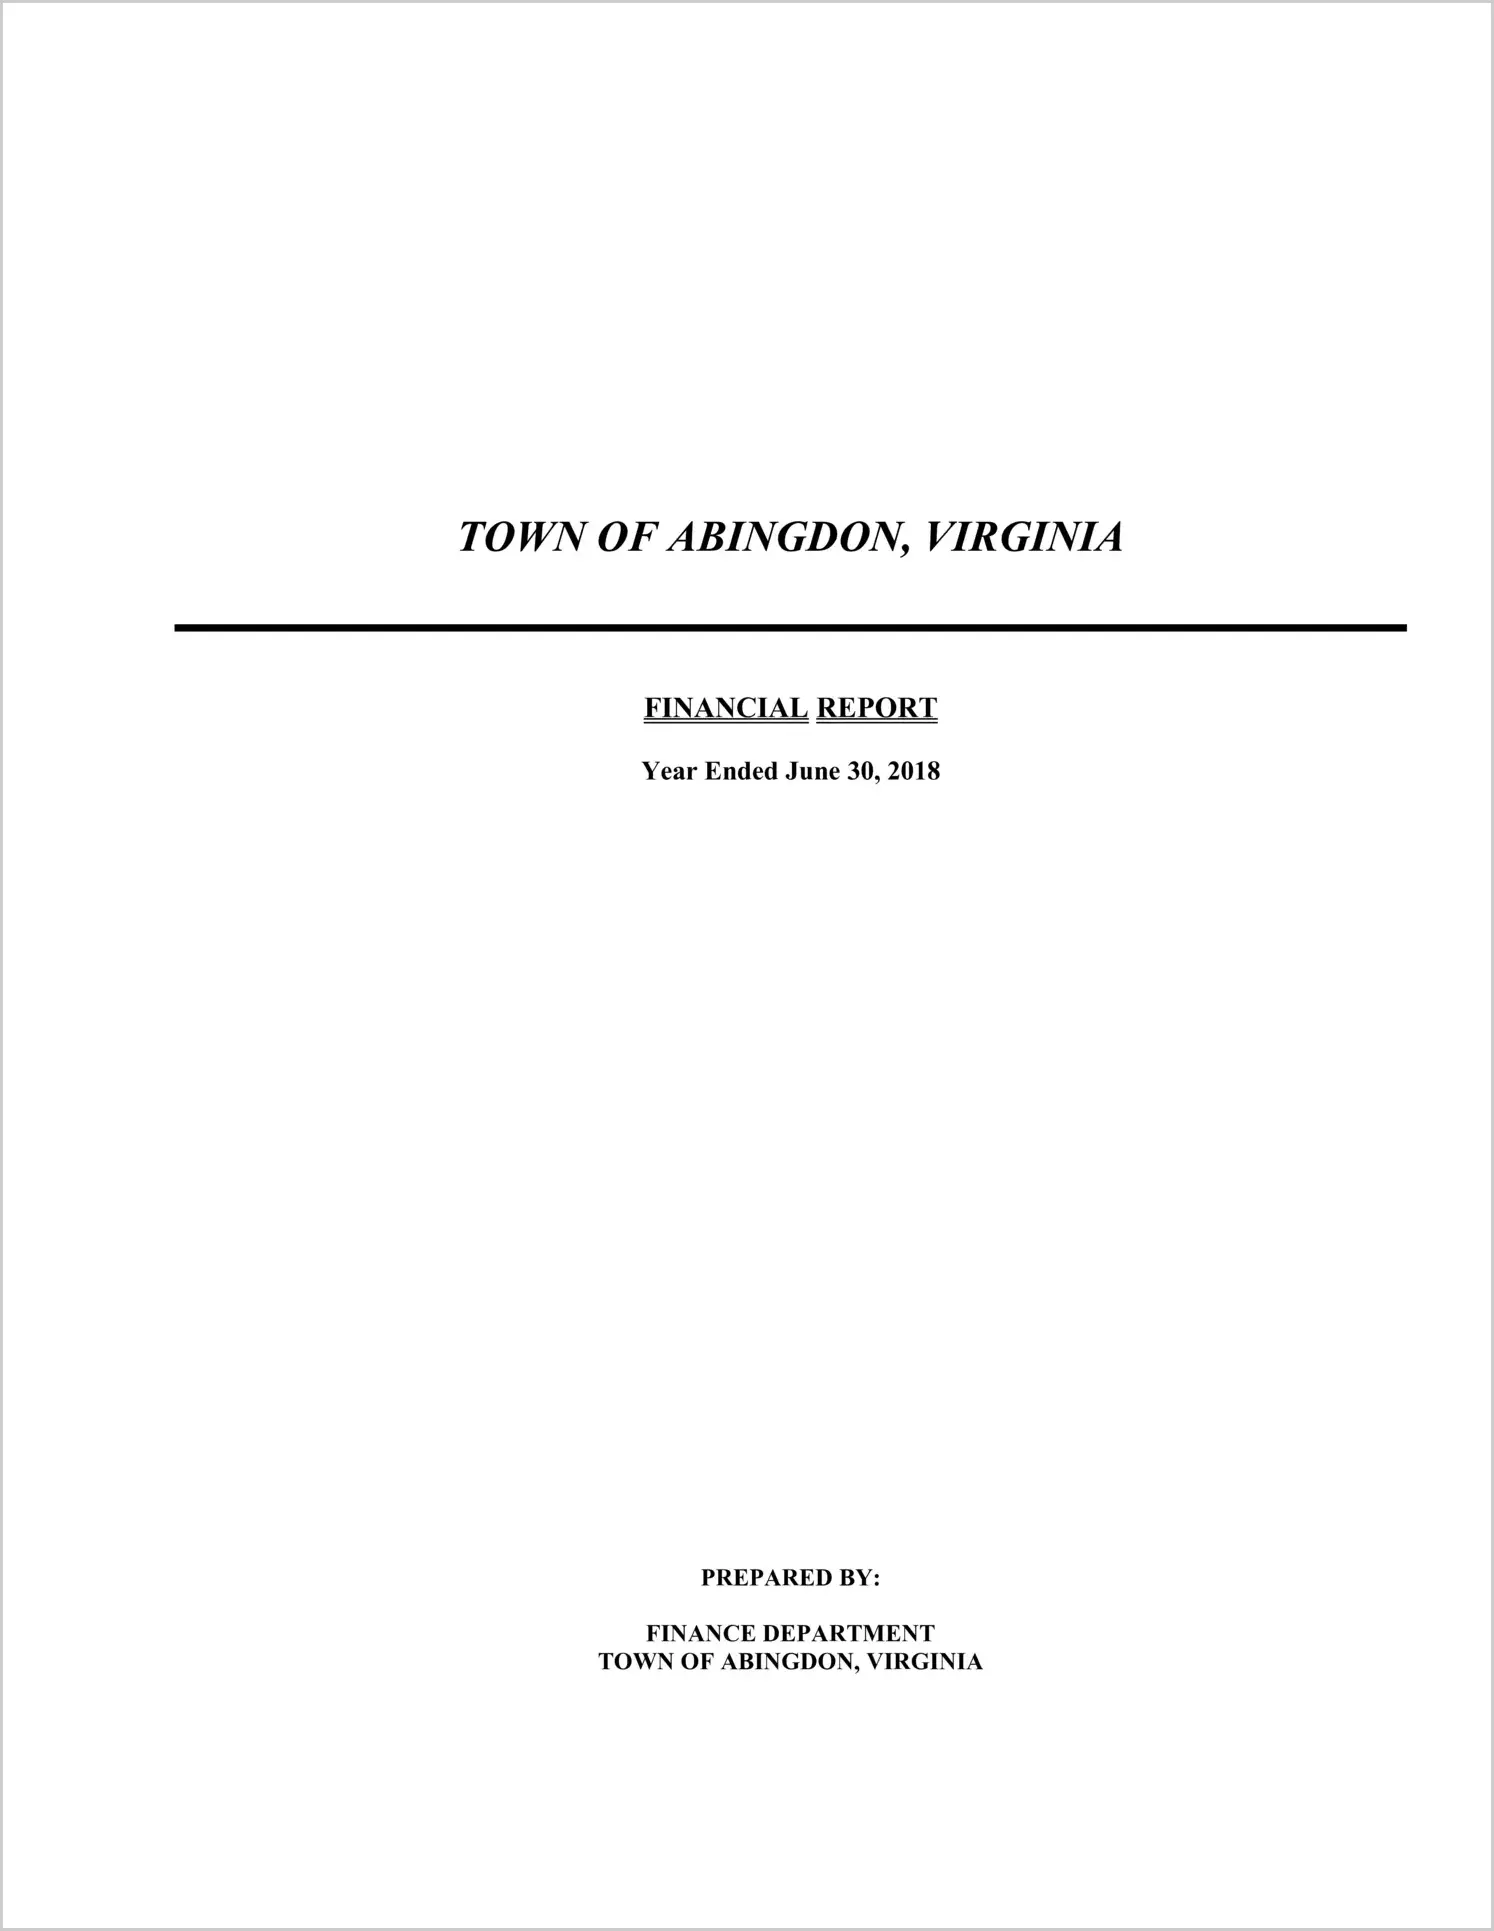 2018 Annual Financial Report for Town of Abingdon